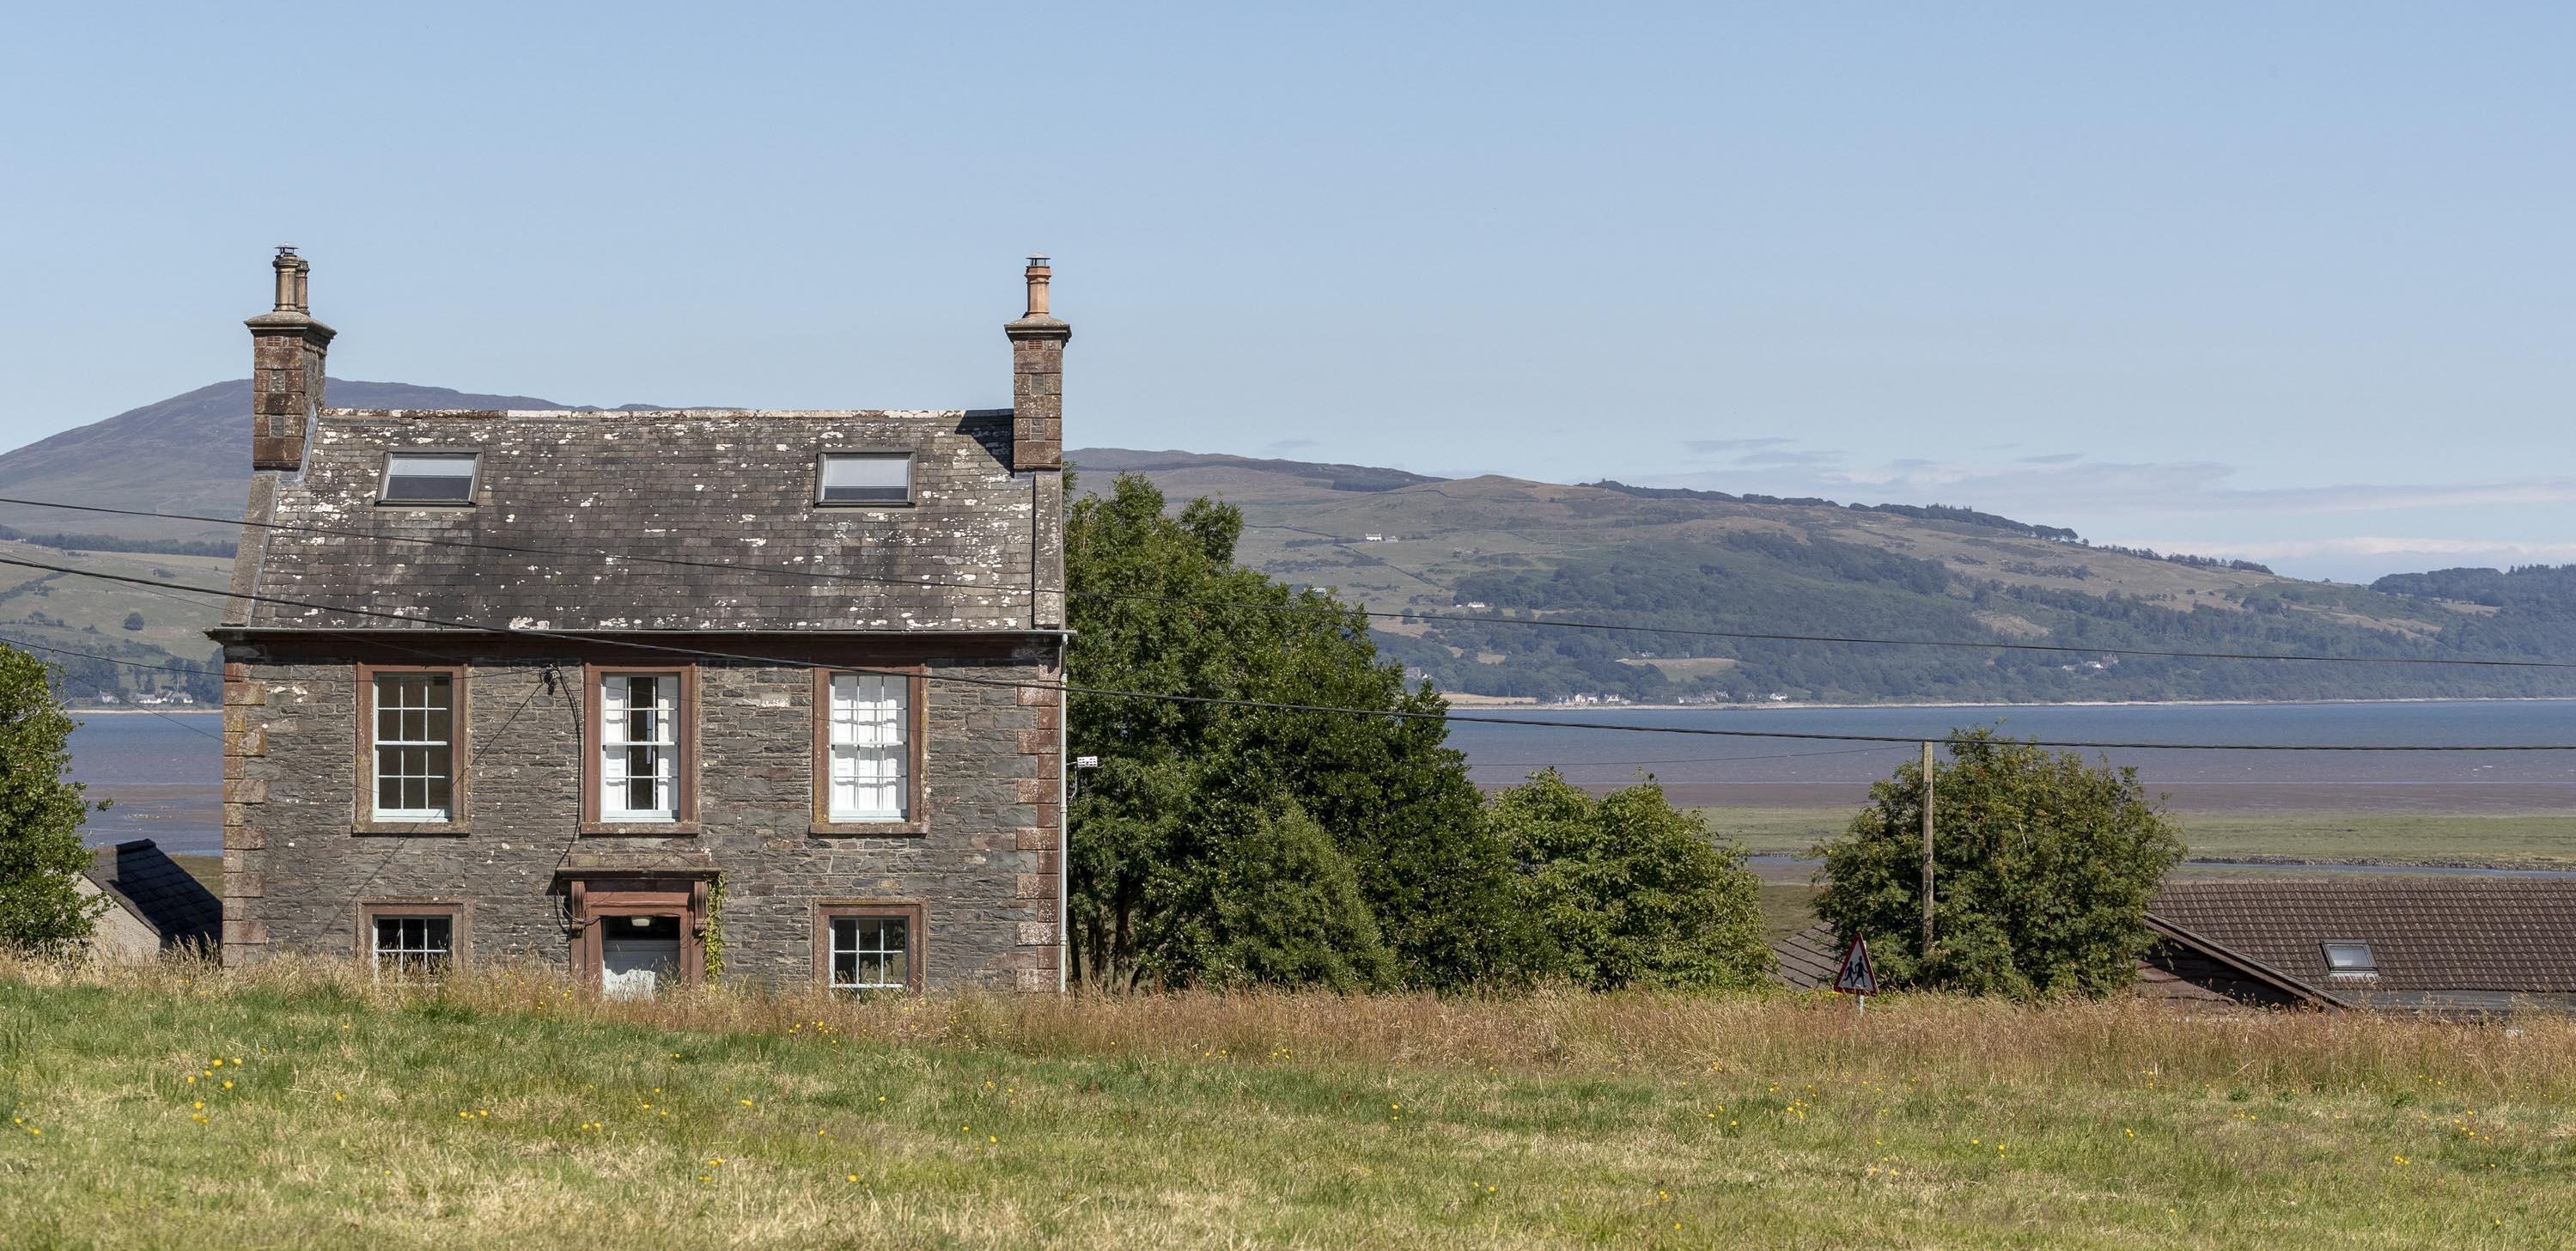 A view of a double fronted old stone house in Wigtown, Scotland's National Book Town. Wigtown bay and the Galloway hills in the distance.